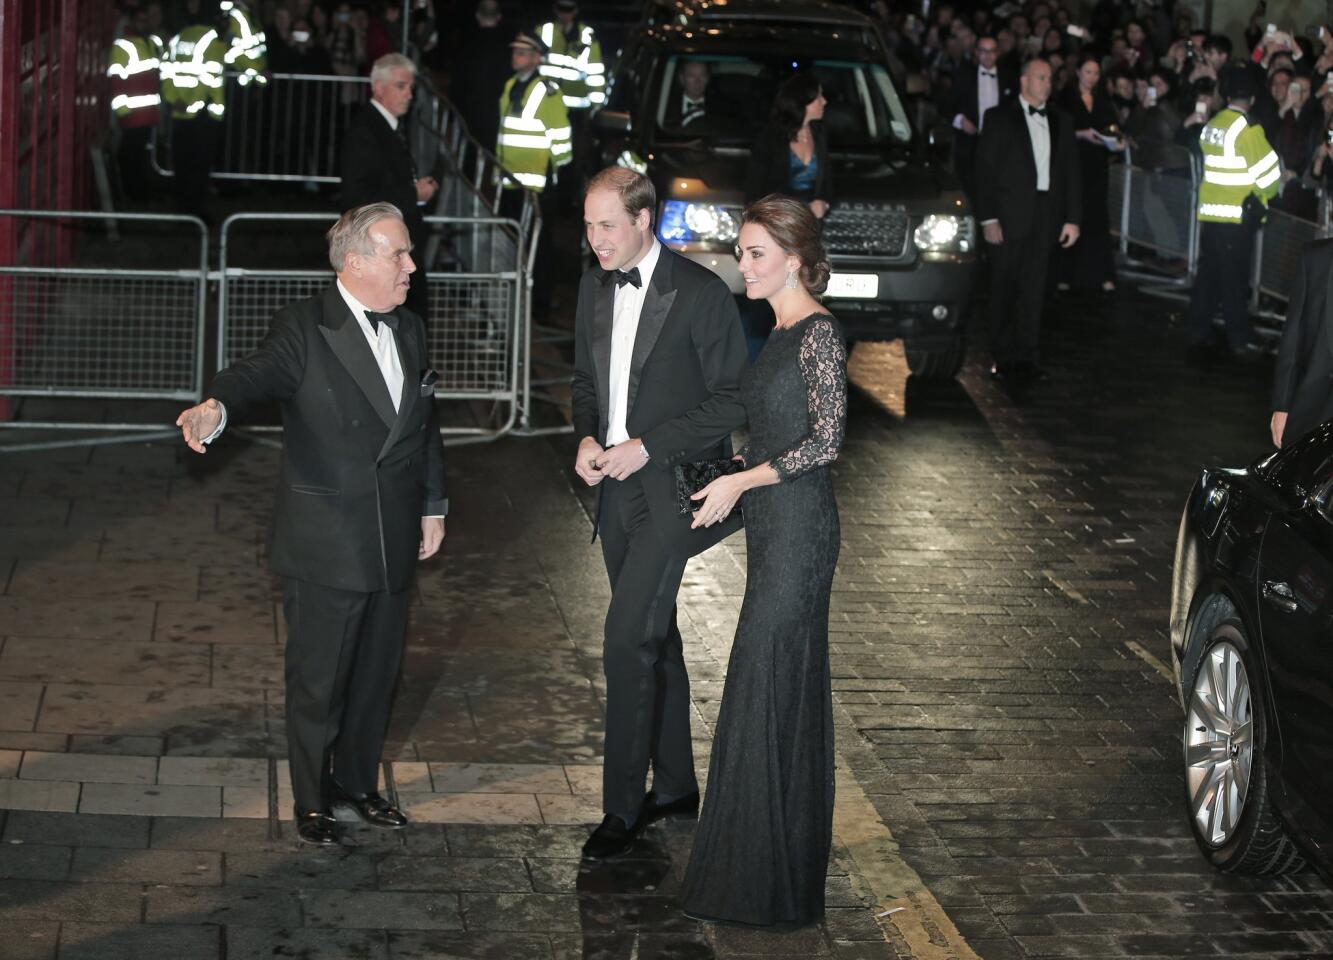 Britain's Prince William and Catherine, Duchess of Cambridge, arrive to attend the Nov. 13 Royal Variety Performance at the Palladium Theatre in London.